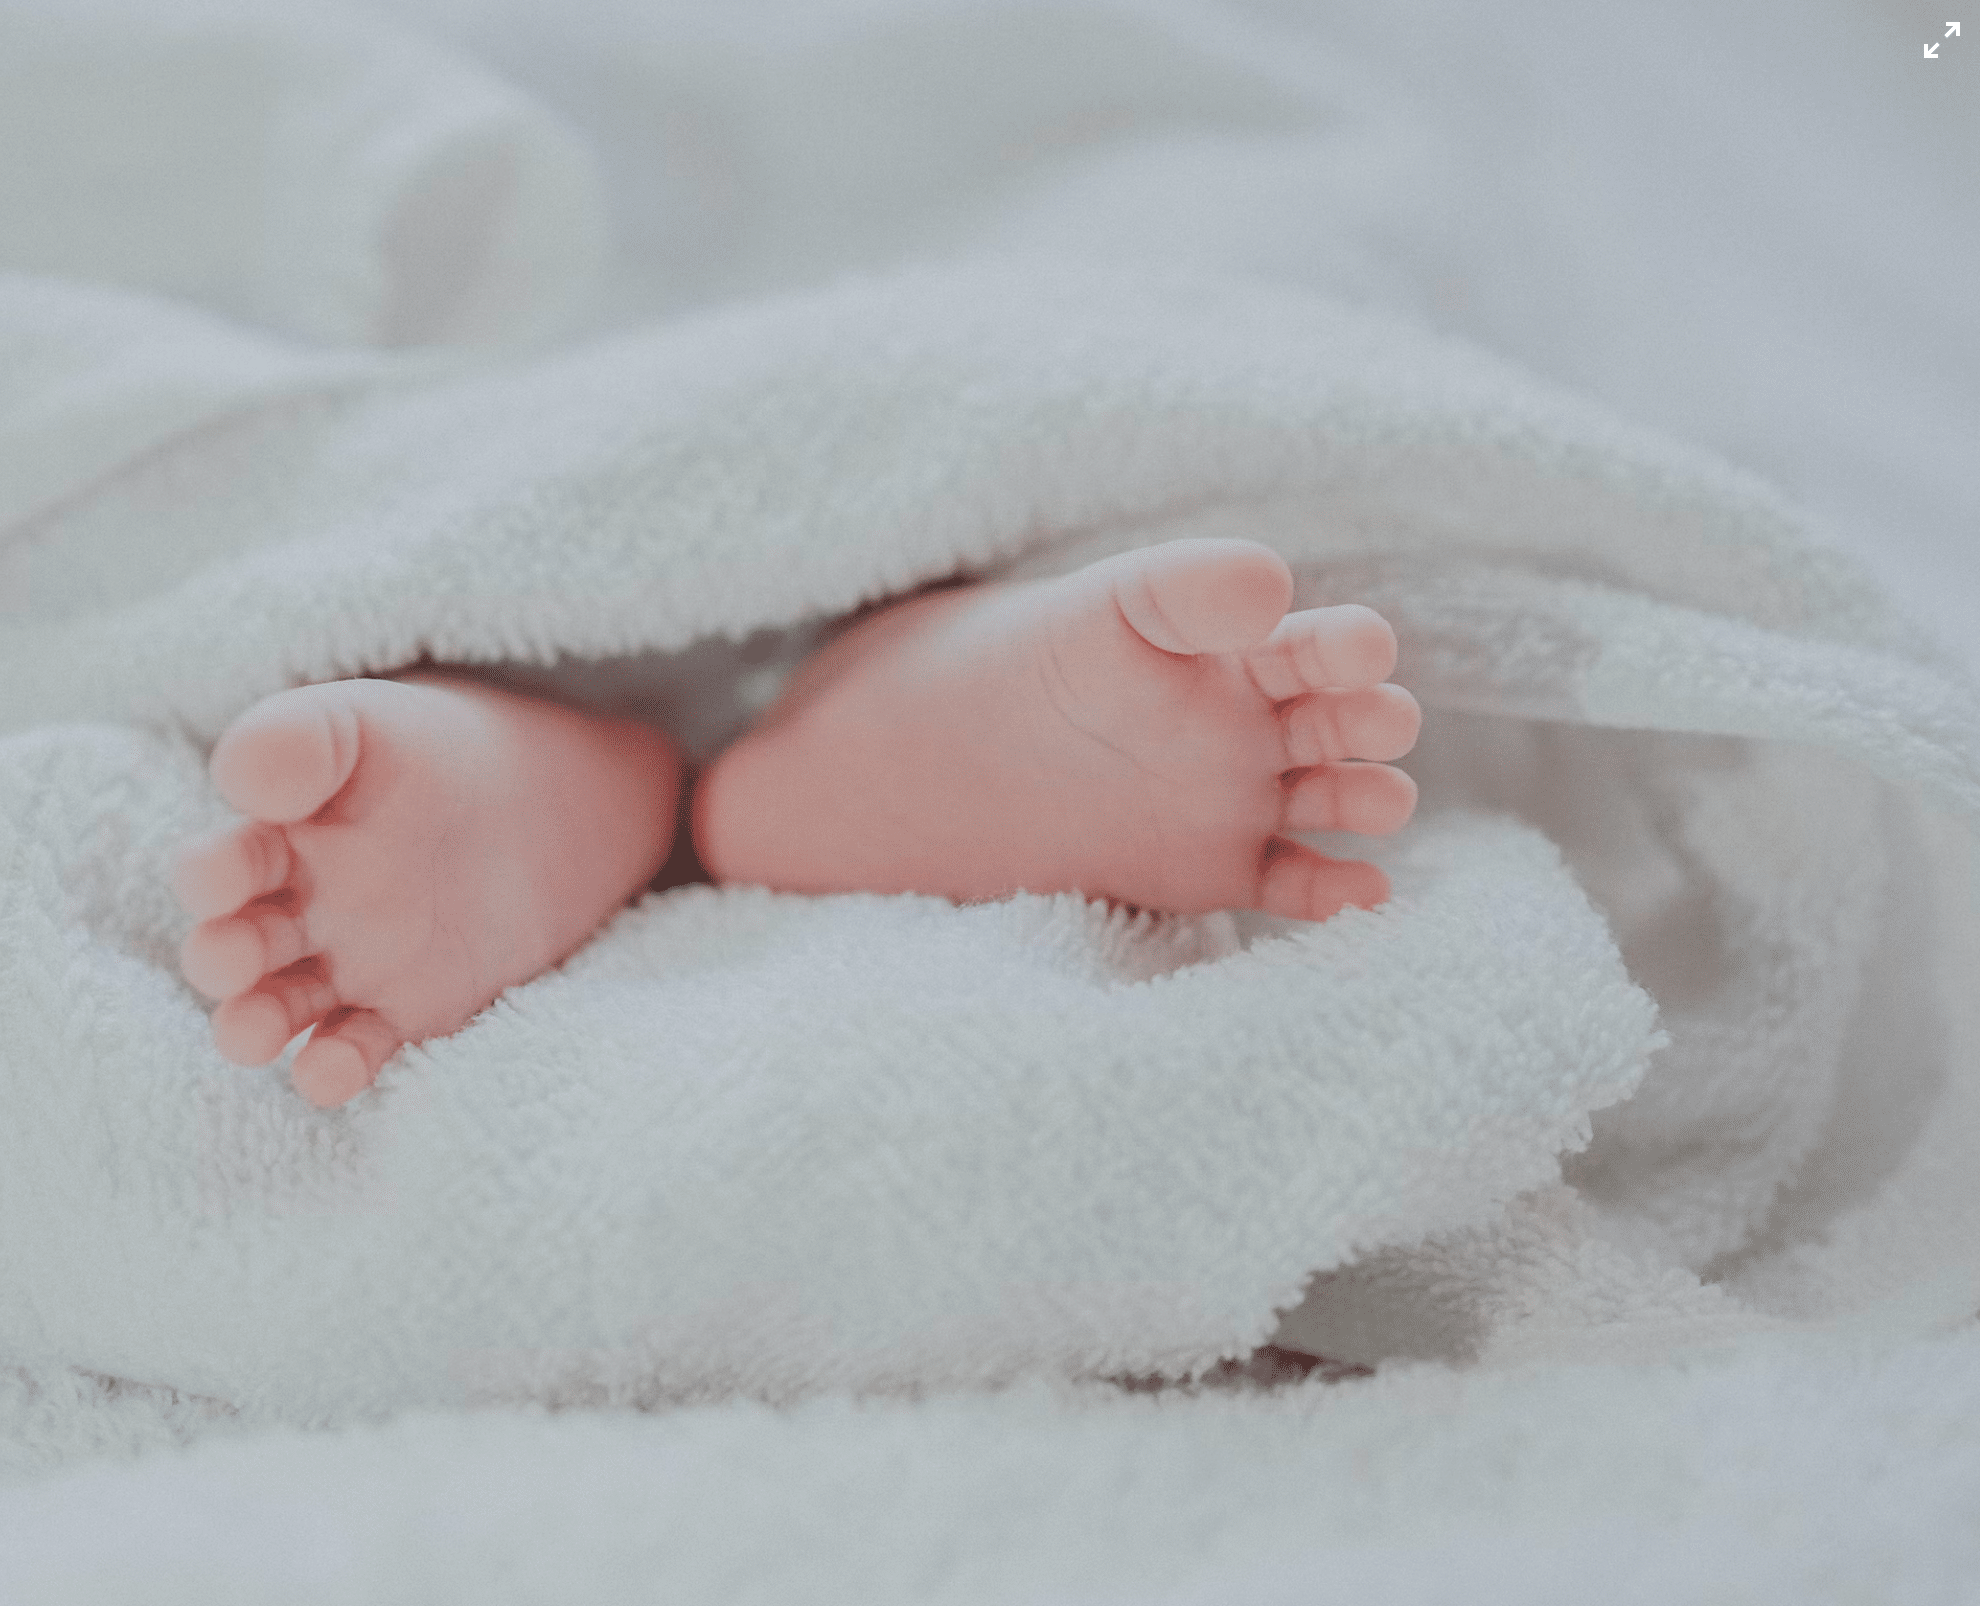 What Should My Baby Wear To Bed With A Fever?